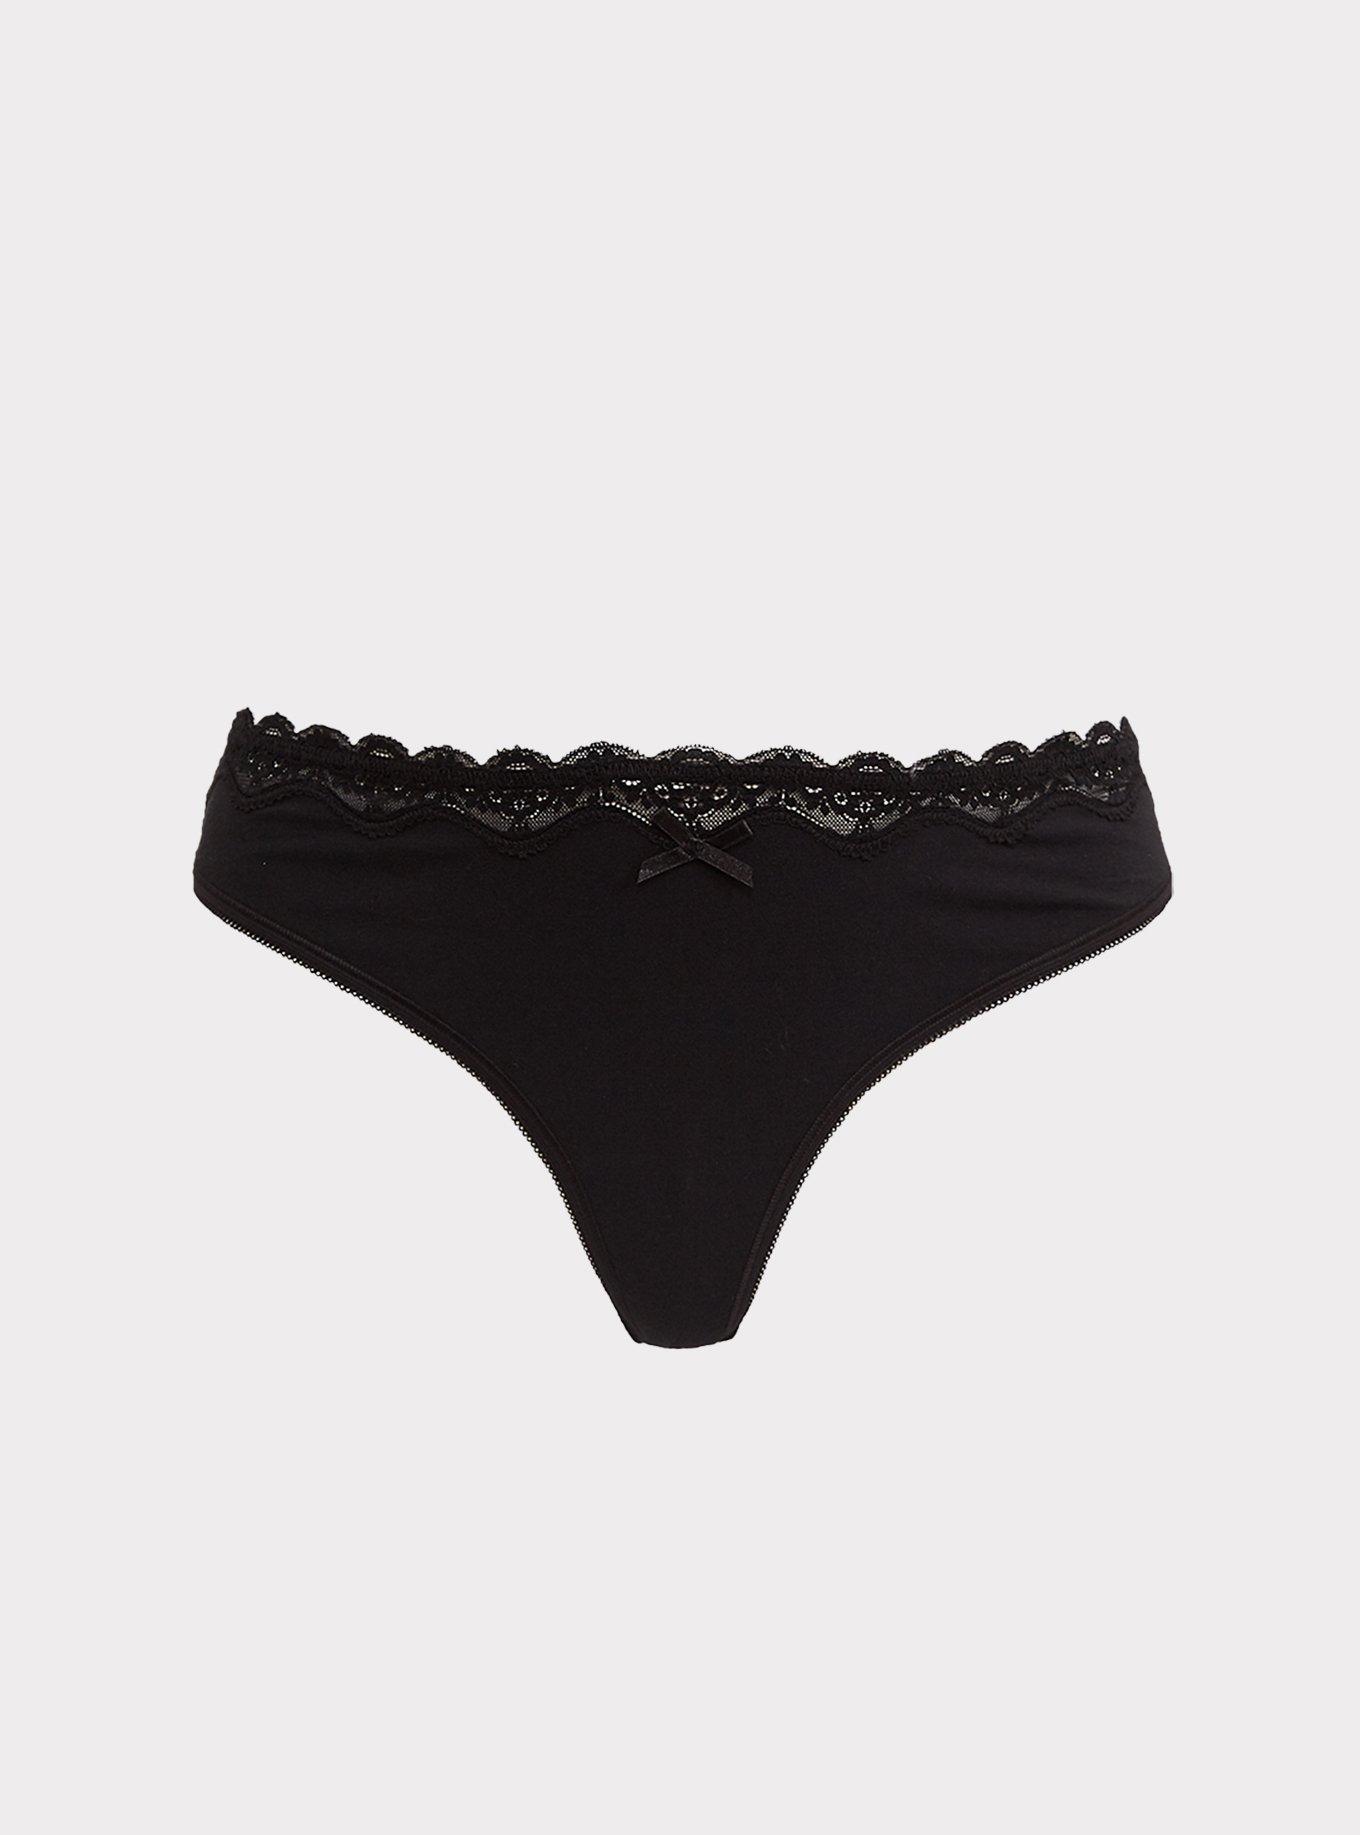 Buy Victoria's Secret Black Lace Trim Knickers from Next Luxembourg